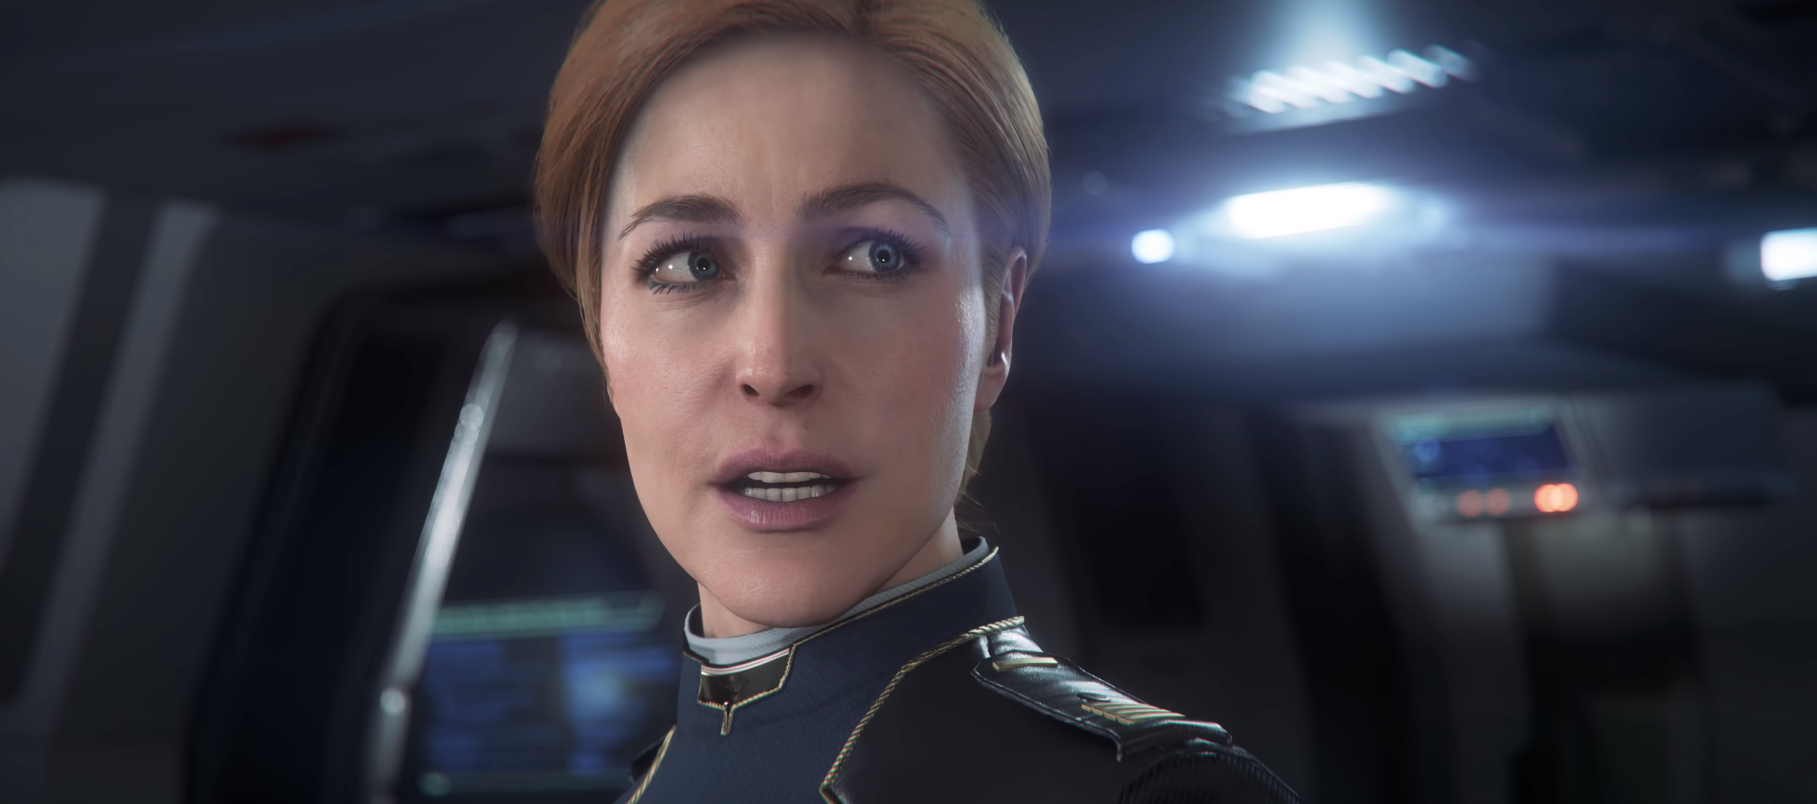 Image for Star Citizen: Squadron 42 gets a new trailer - stars Mark Hamill, Gillian Anderson, Gary Oldman, and Henry Cavill